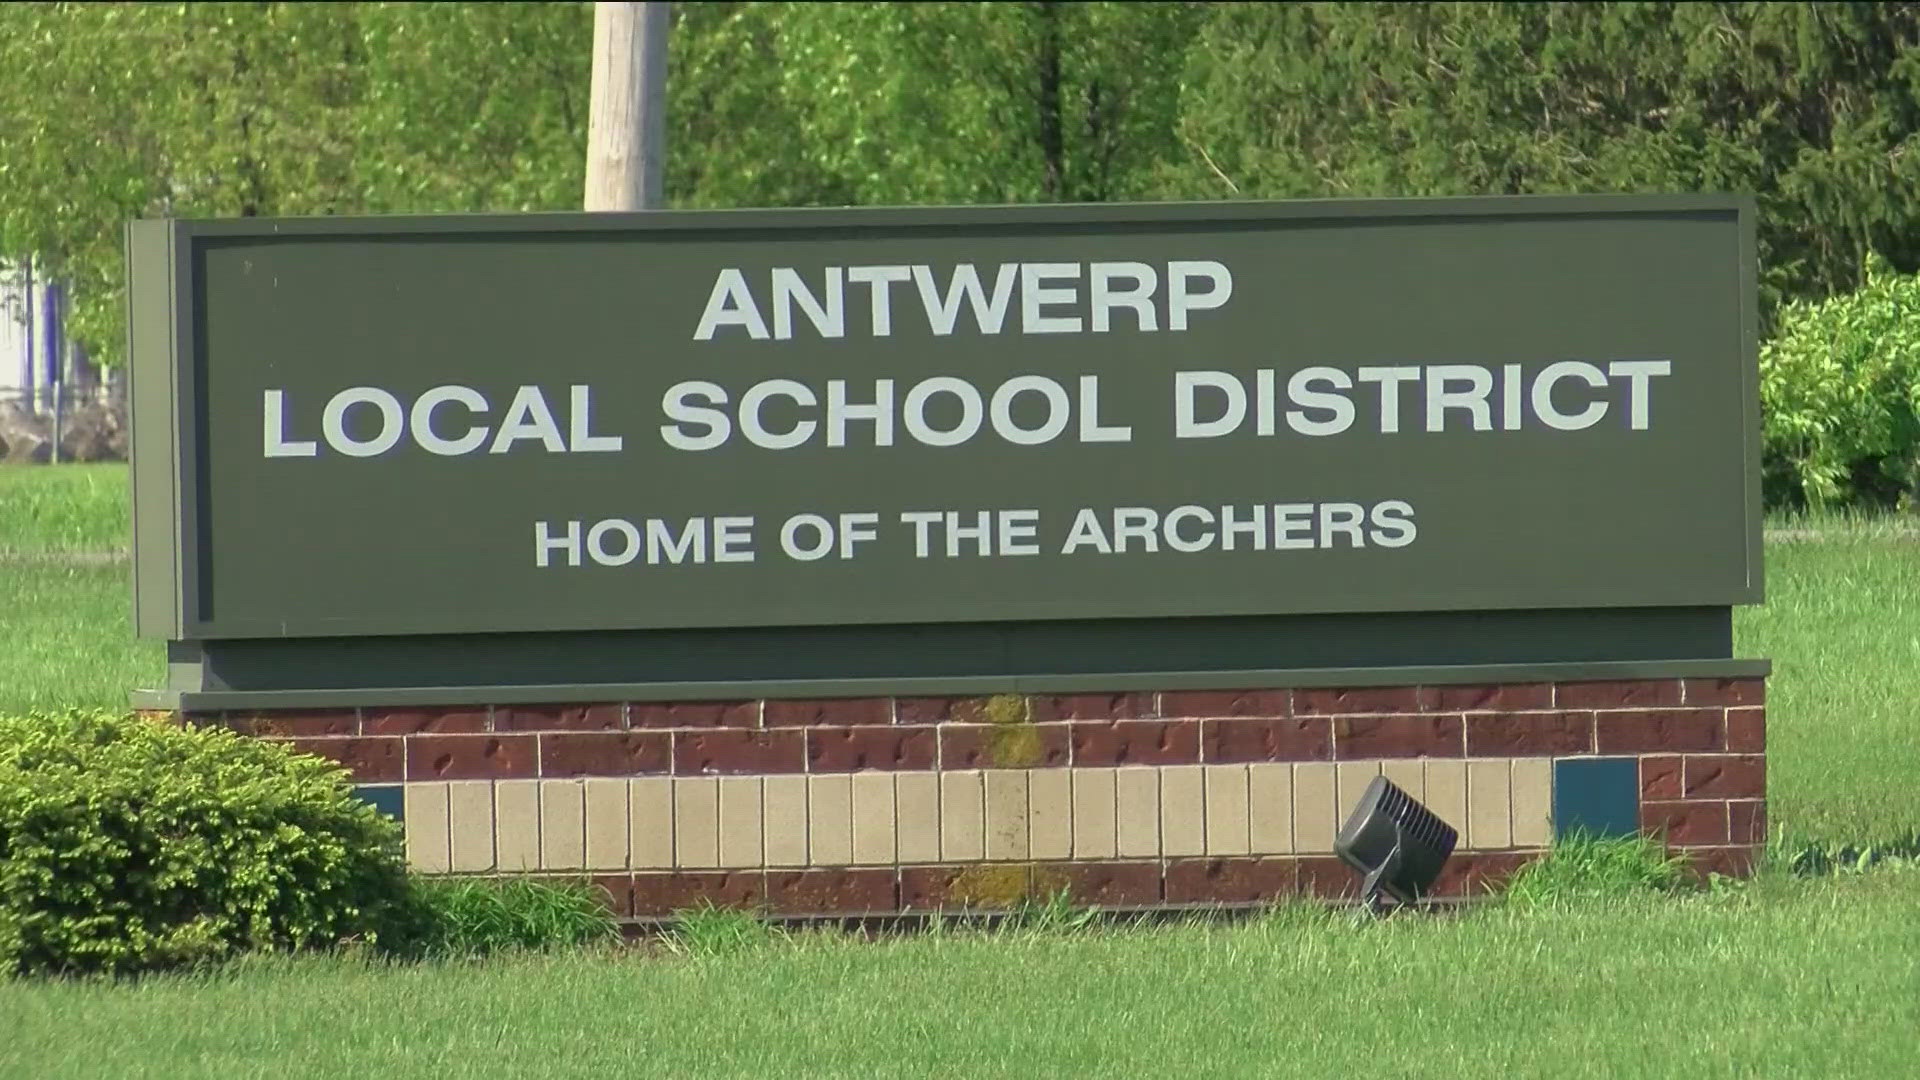 Sixty-seven districts across Ohio have armed staff on-site. Antwerp is one of three northwest Ohio districts with the policy in place.